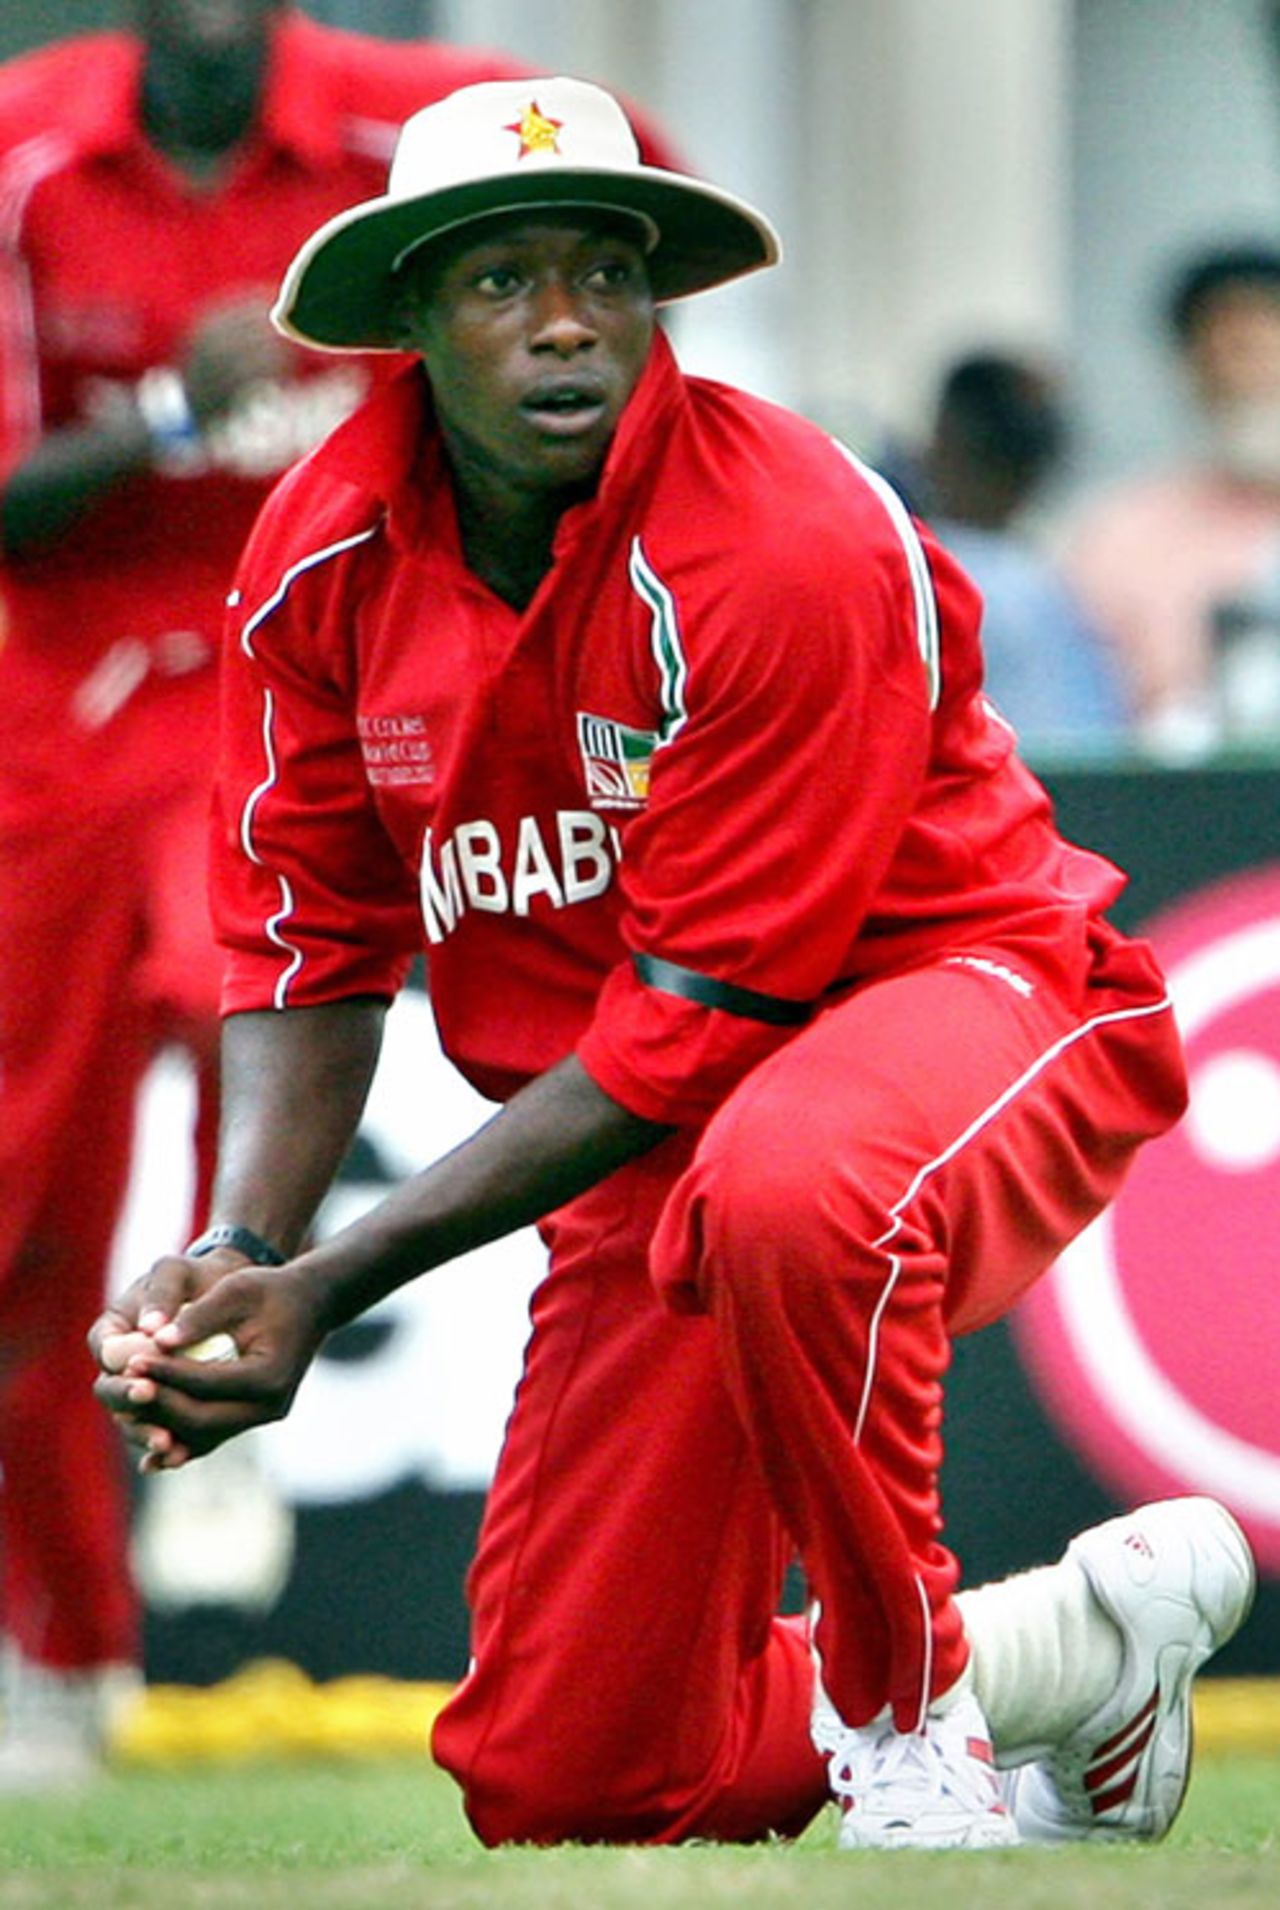 Vusi Sibanda clutches the ball after catching Shivnarine Chanderpaul, West Indies v Zimbabwe, Group D , Jamaica, March 19, 2007